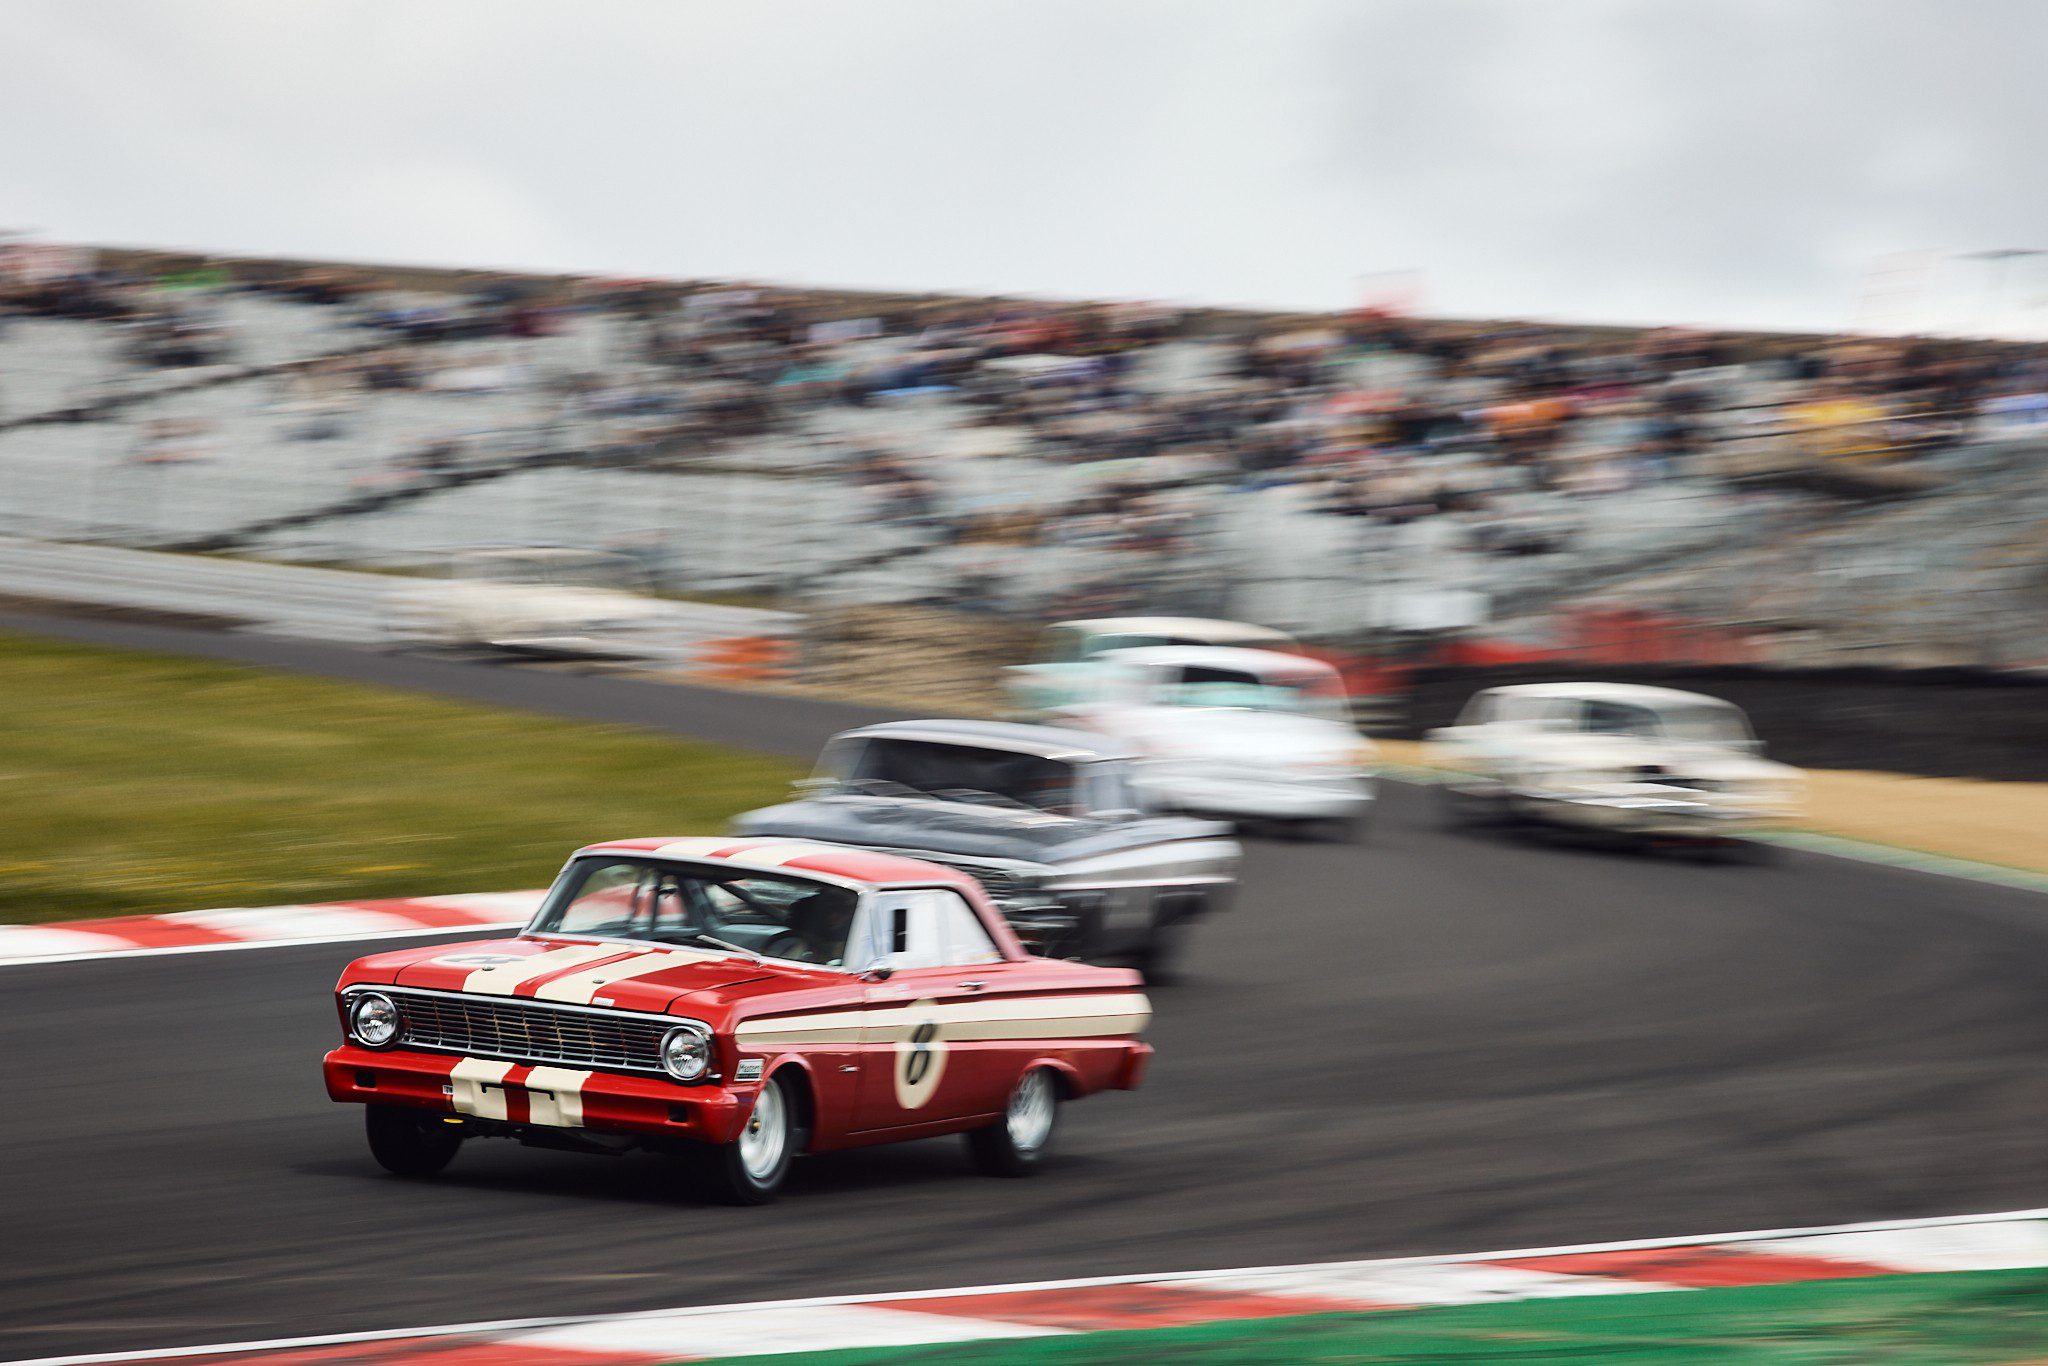 The Ford Falcon of Trevor Buckley leads a gaggle of cars around the tricky, off camber Paddock Hill Bend.